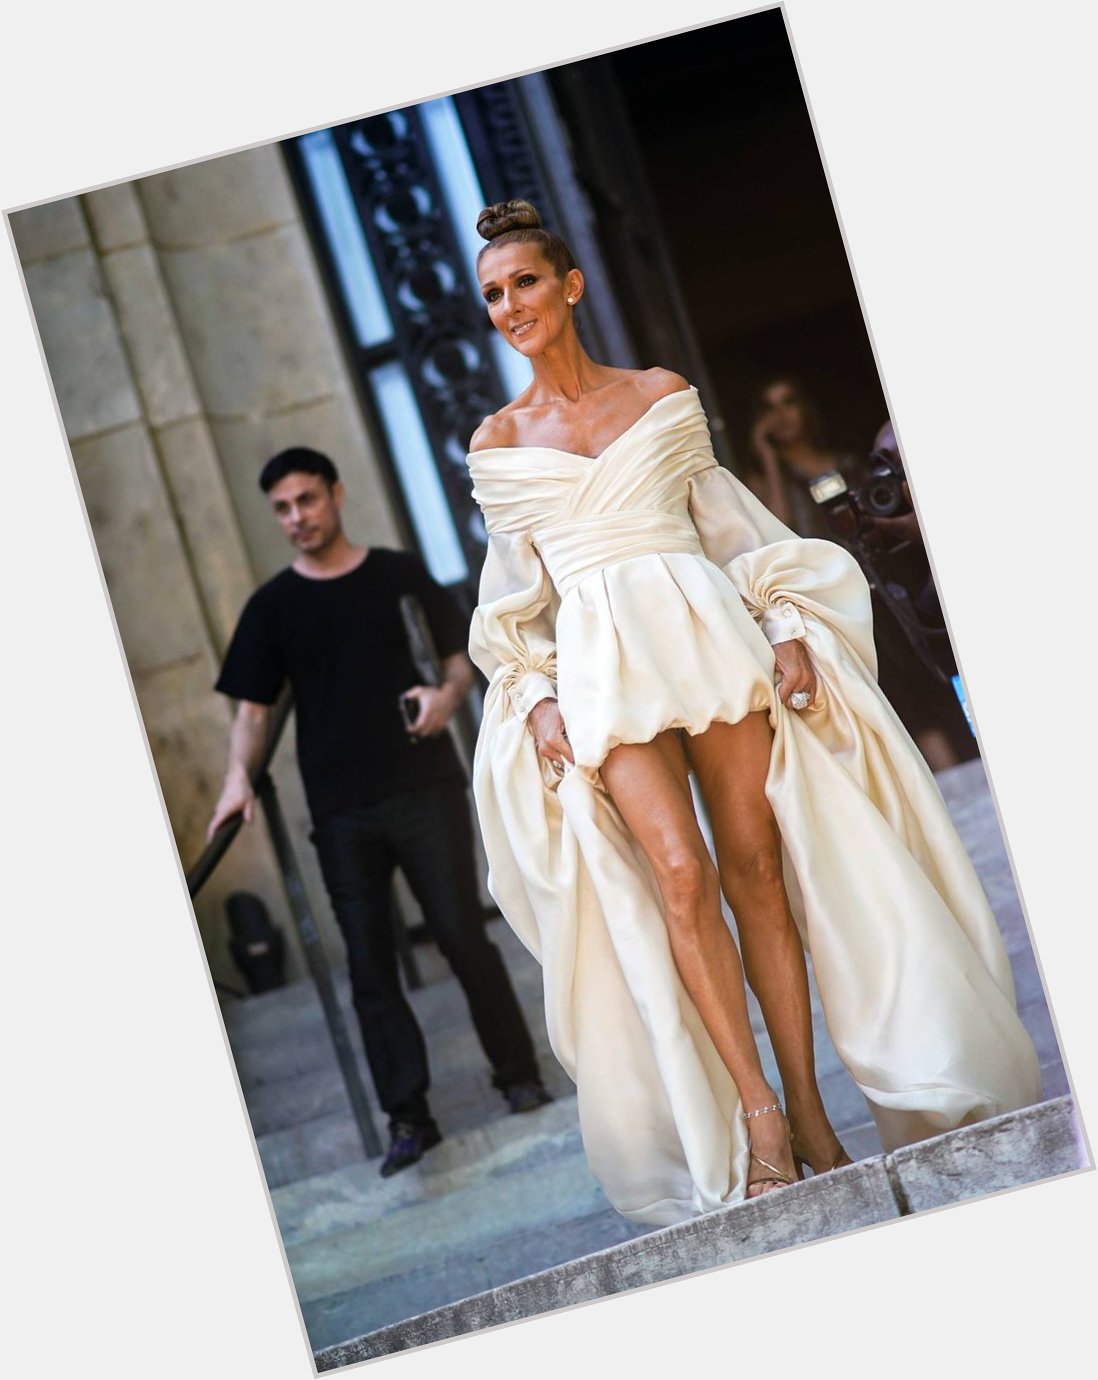 Happy birthday to our favourite, and most extra, street style star, Céline Dion! 